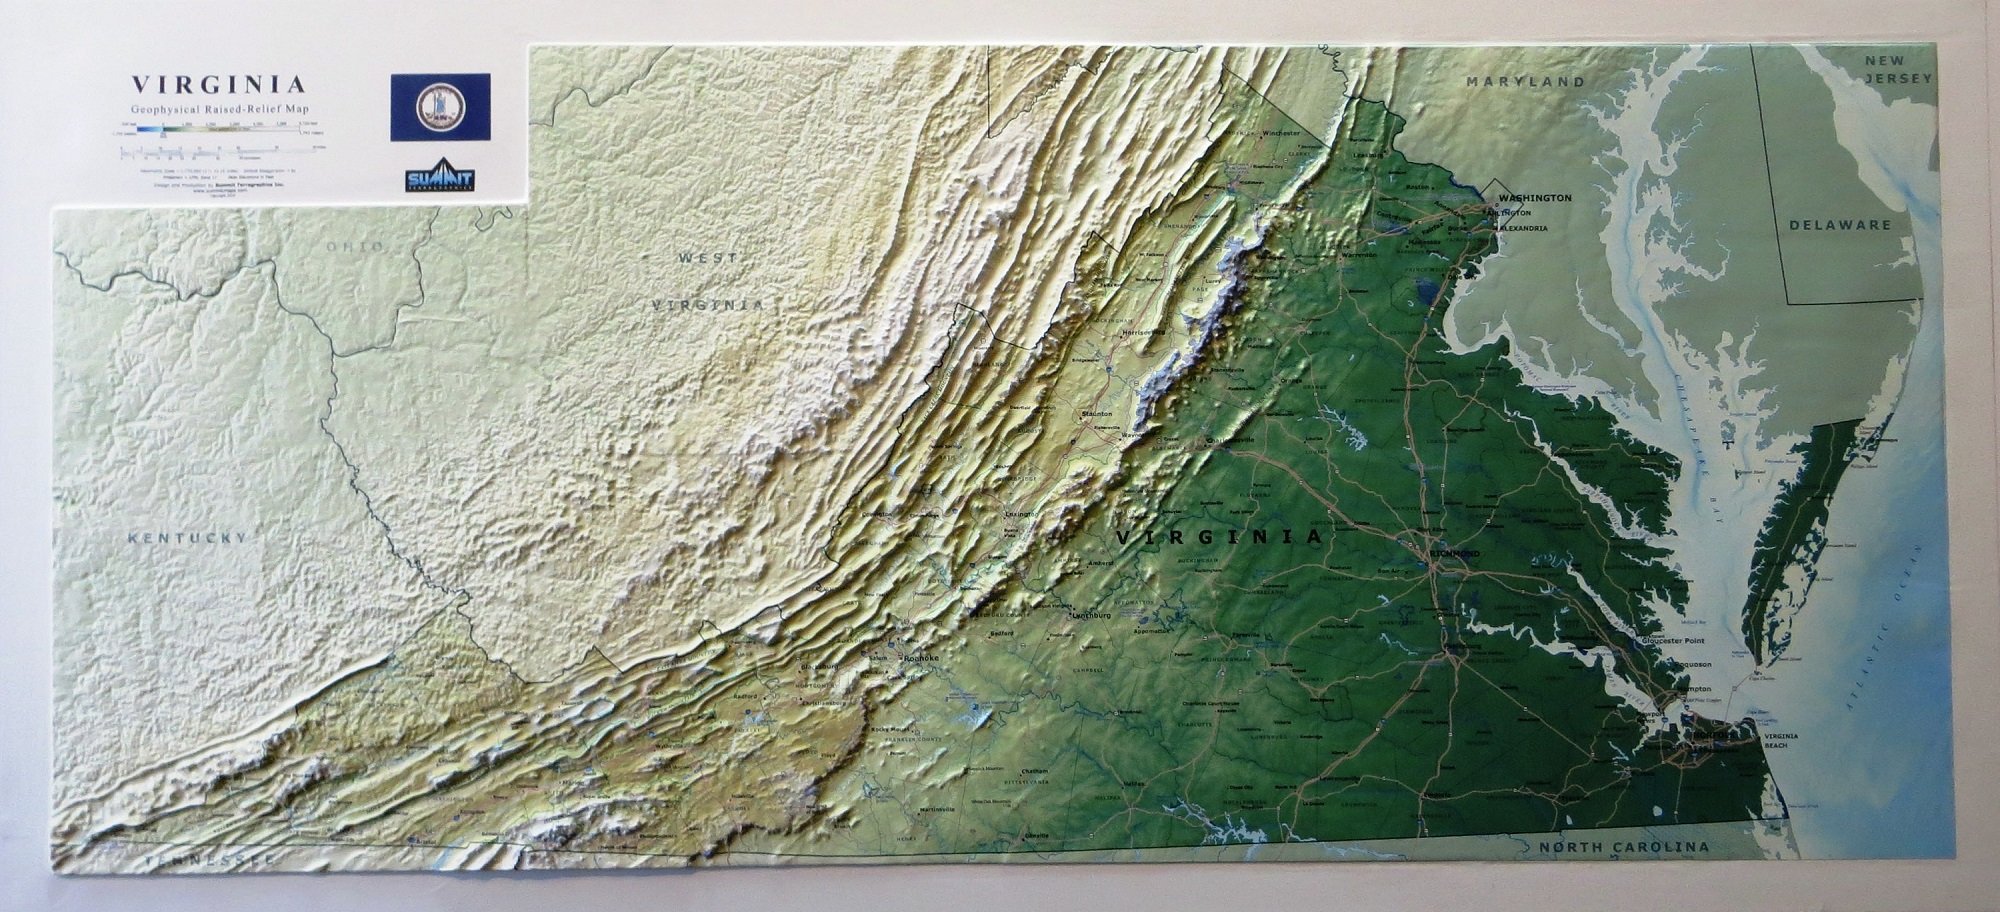 Virginia State Three Dimensional 3D Raised Relief Map